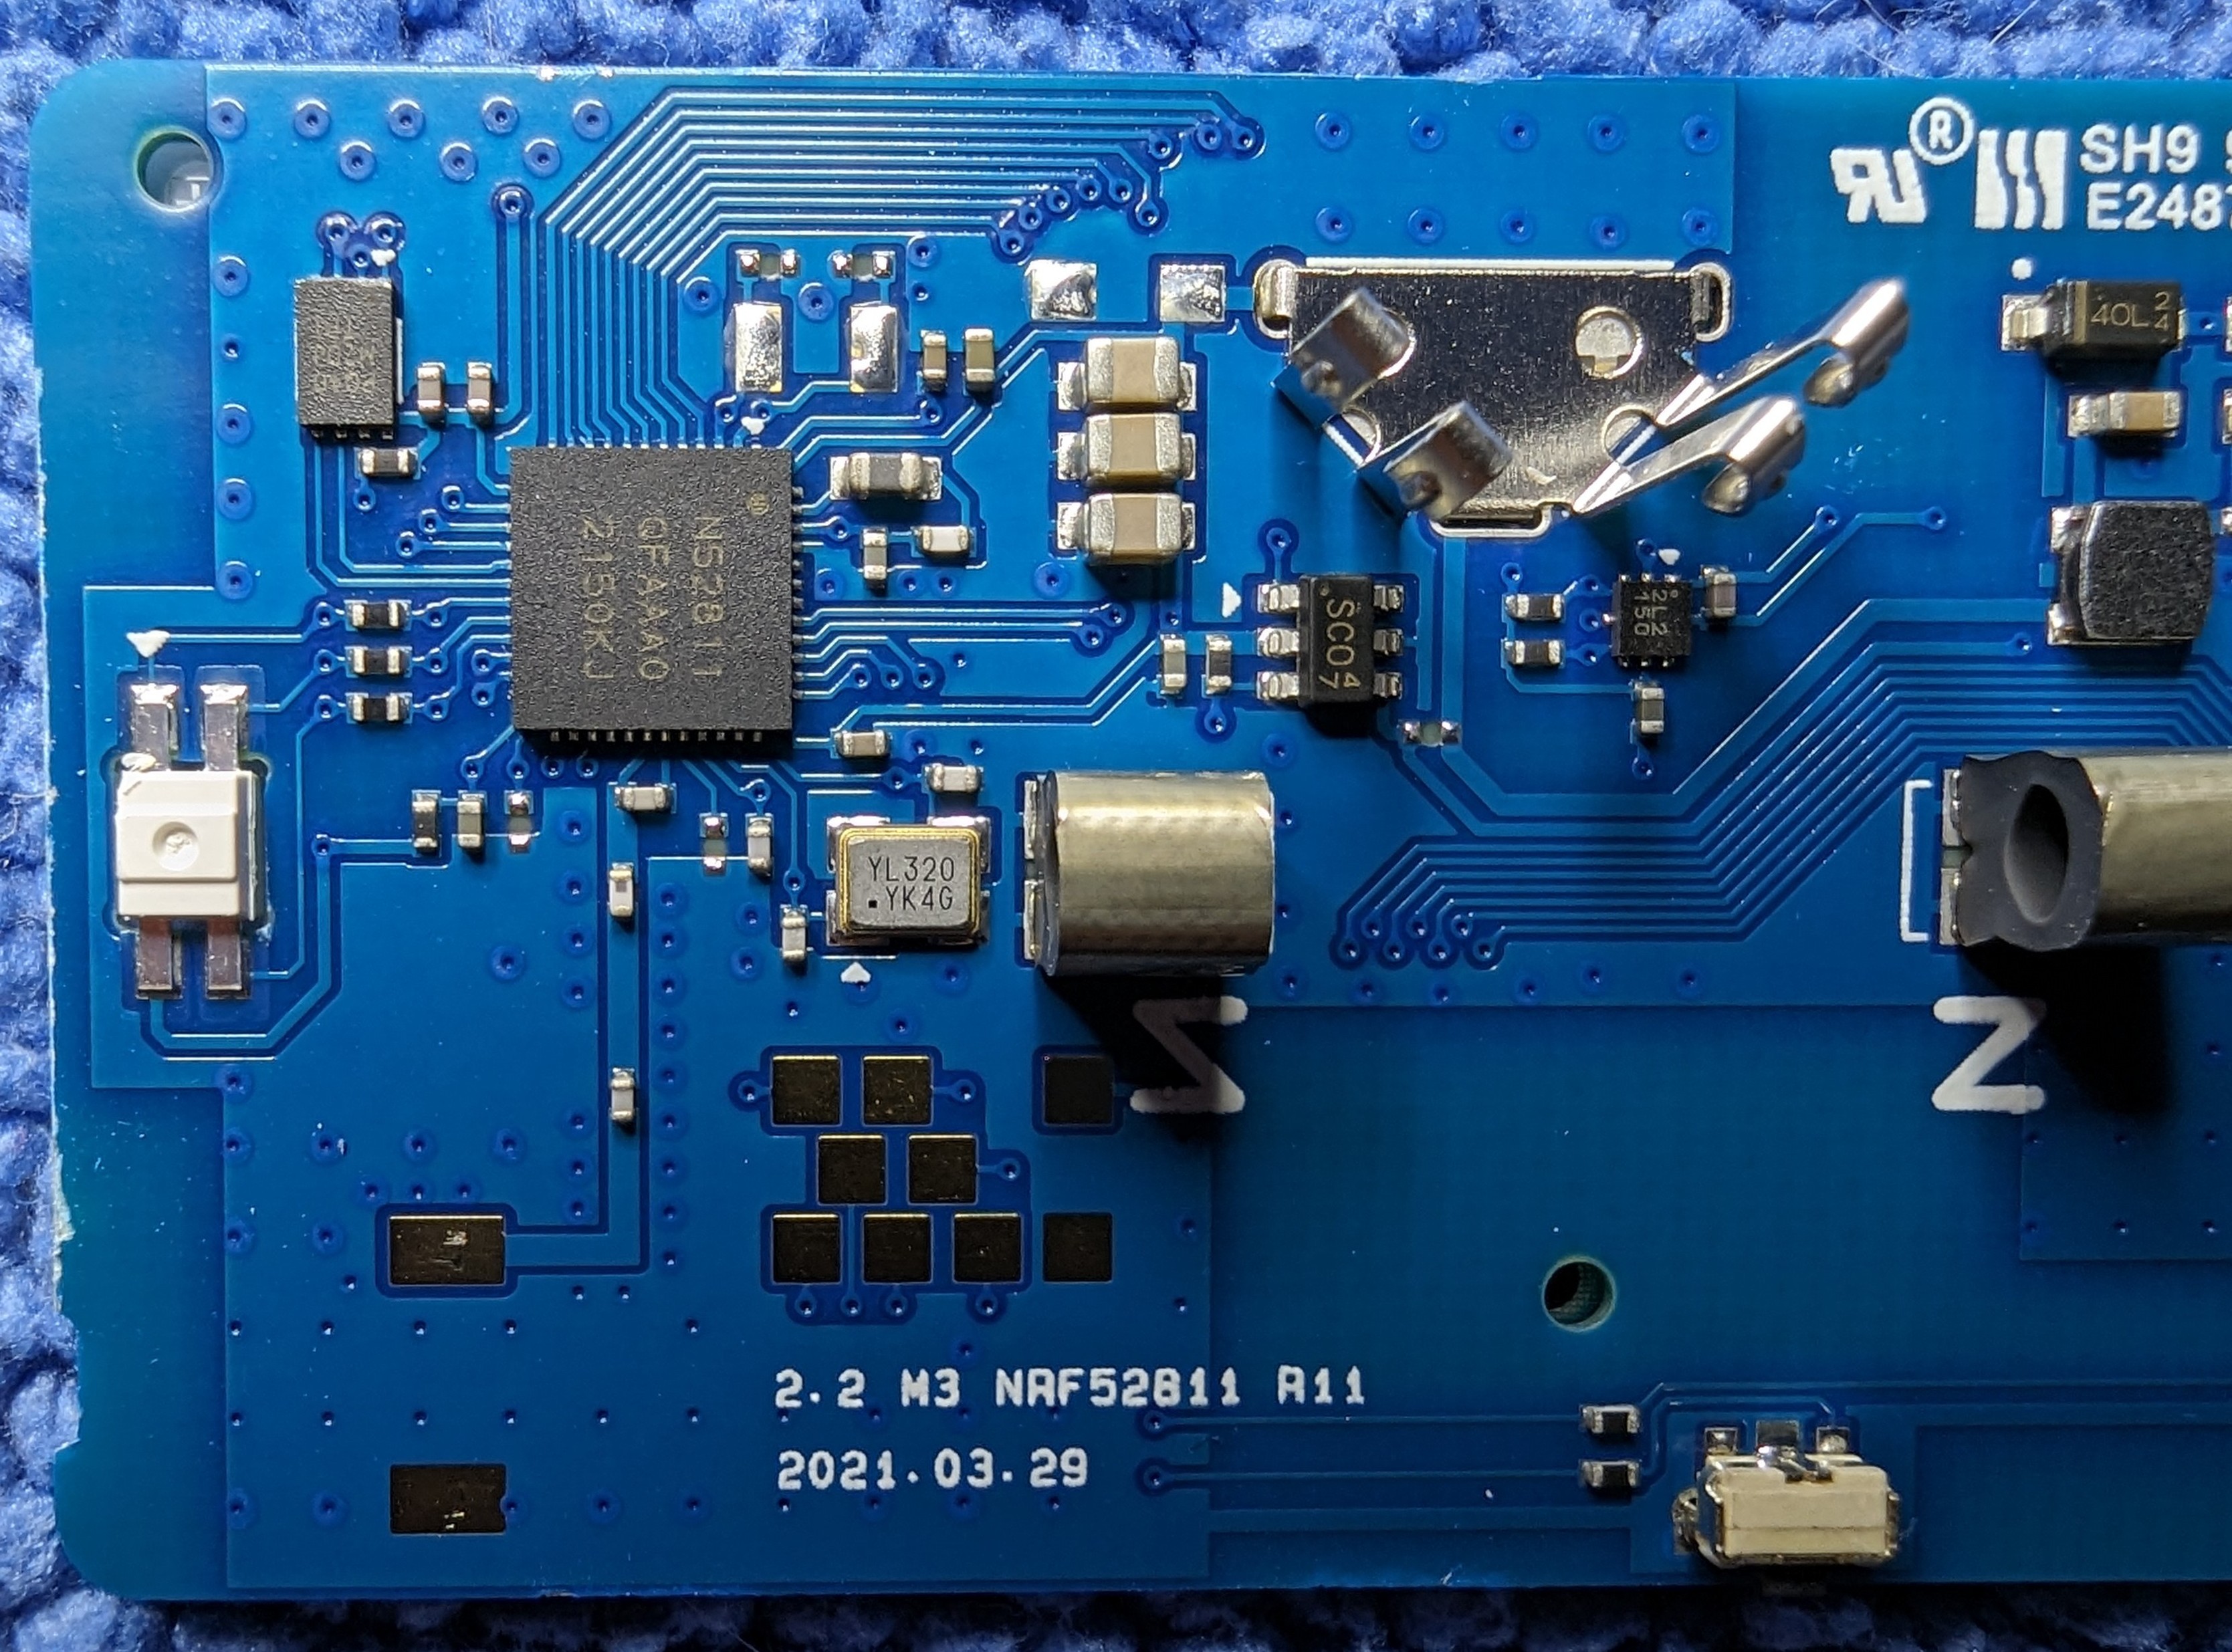 A close up look at the micro and related pcb traces.